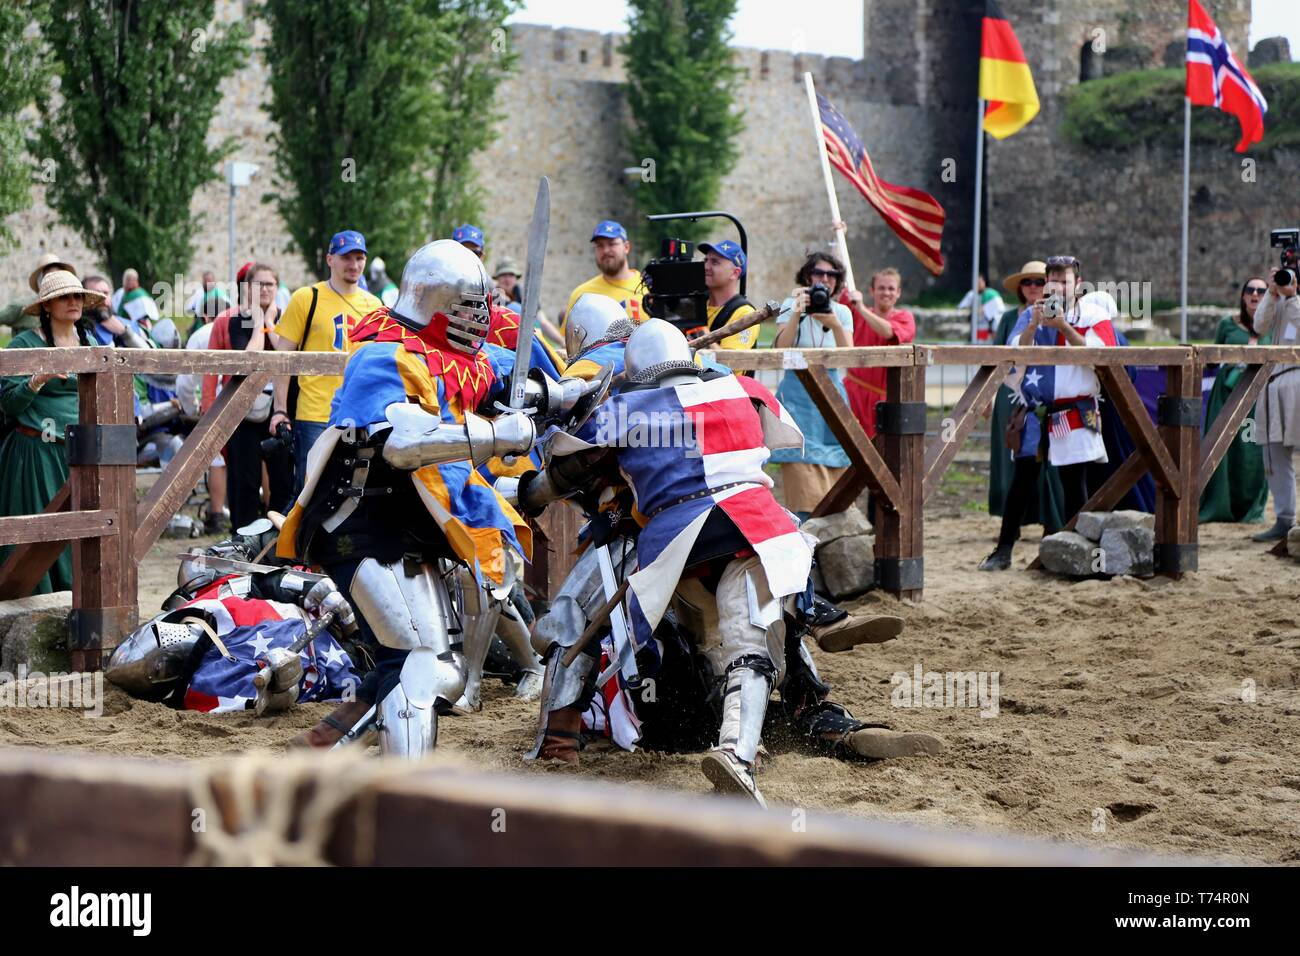 Smederevo. 2nd May, 2019. Competitors clash at the opening day of the 10th World National HMB (Historic Medieval Battle) Championship in Smederevo, Serbia on May 2, 2019. Fighters from 40 countries gathered in the Serbian city of Smederevo for an unusual international tournament that recreates historic battle techniques-the World National HMB Championship. The Chinese team is made up of 27 members, and it is China's third appearance at the event. Credit: Shi Zhongyu/Xinhua/Alamy Live News Stock Photo